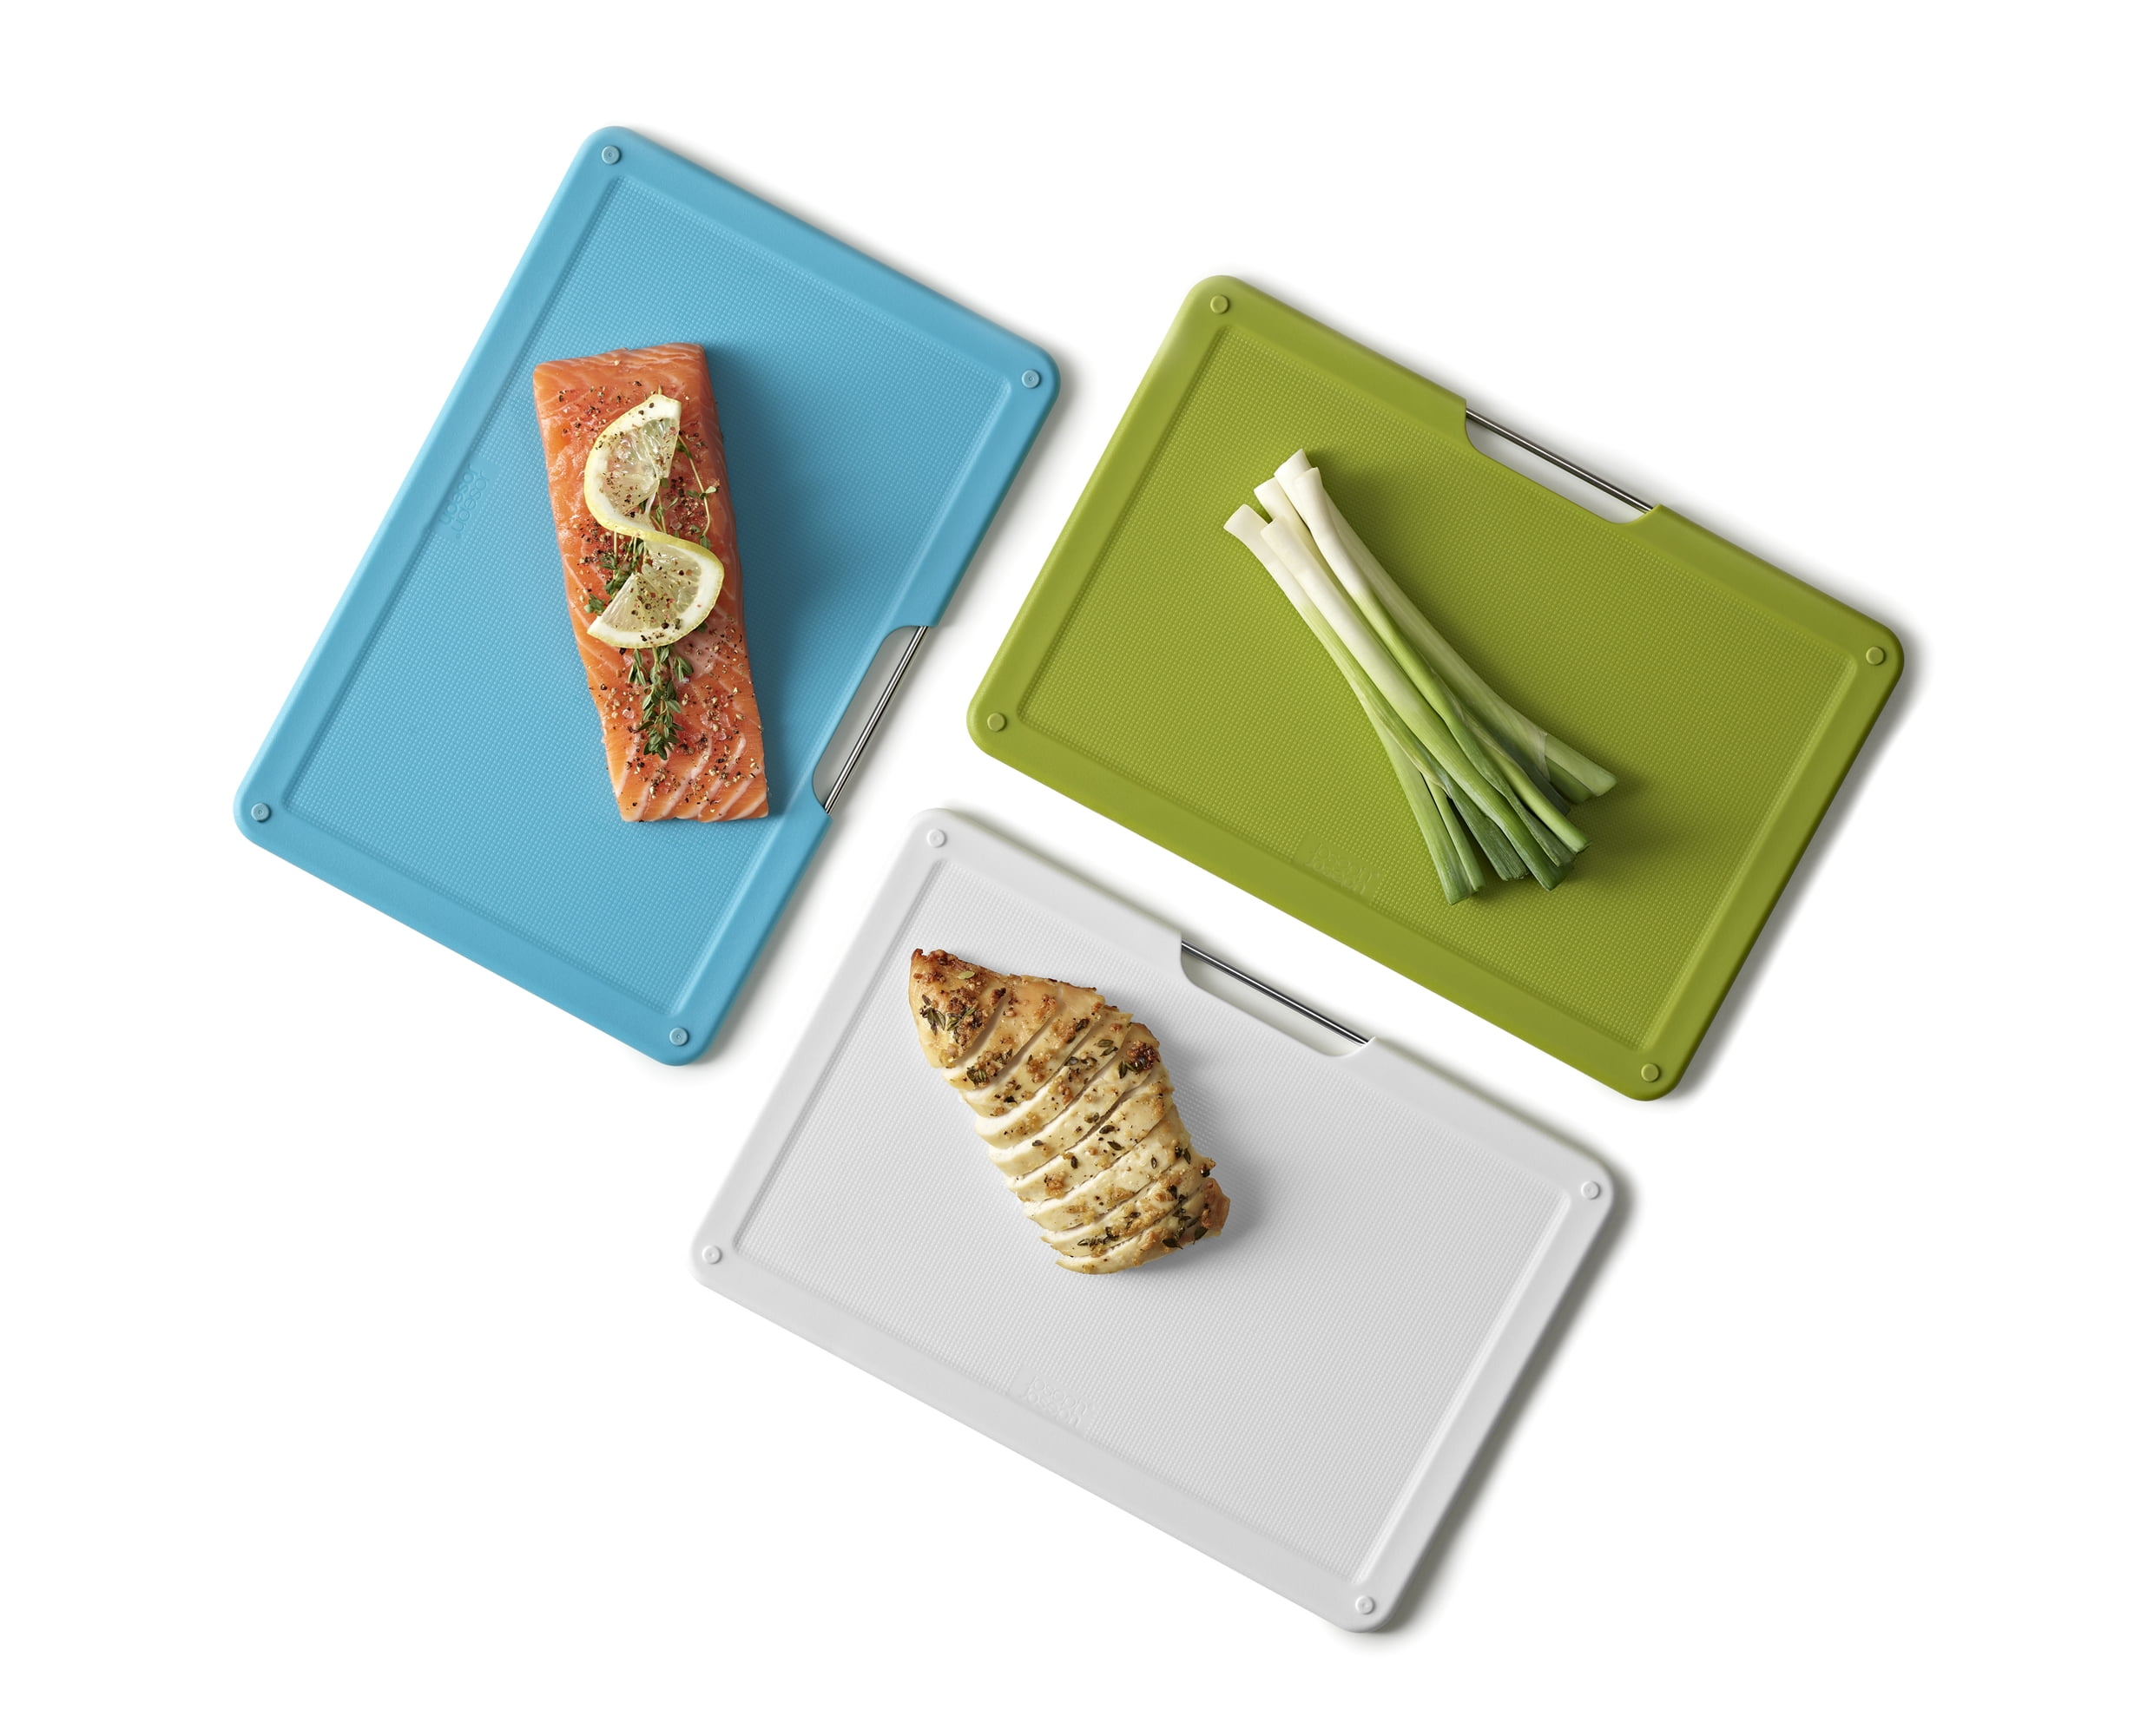 NAPOLEON Premium Cutting Board and Knife Set 70039 - The Home Depot